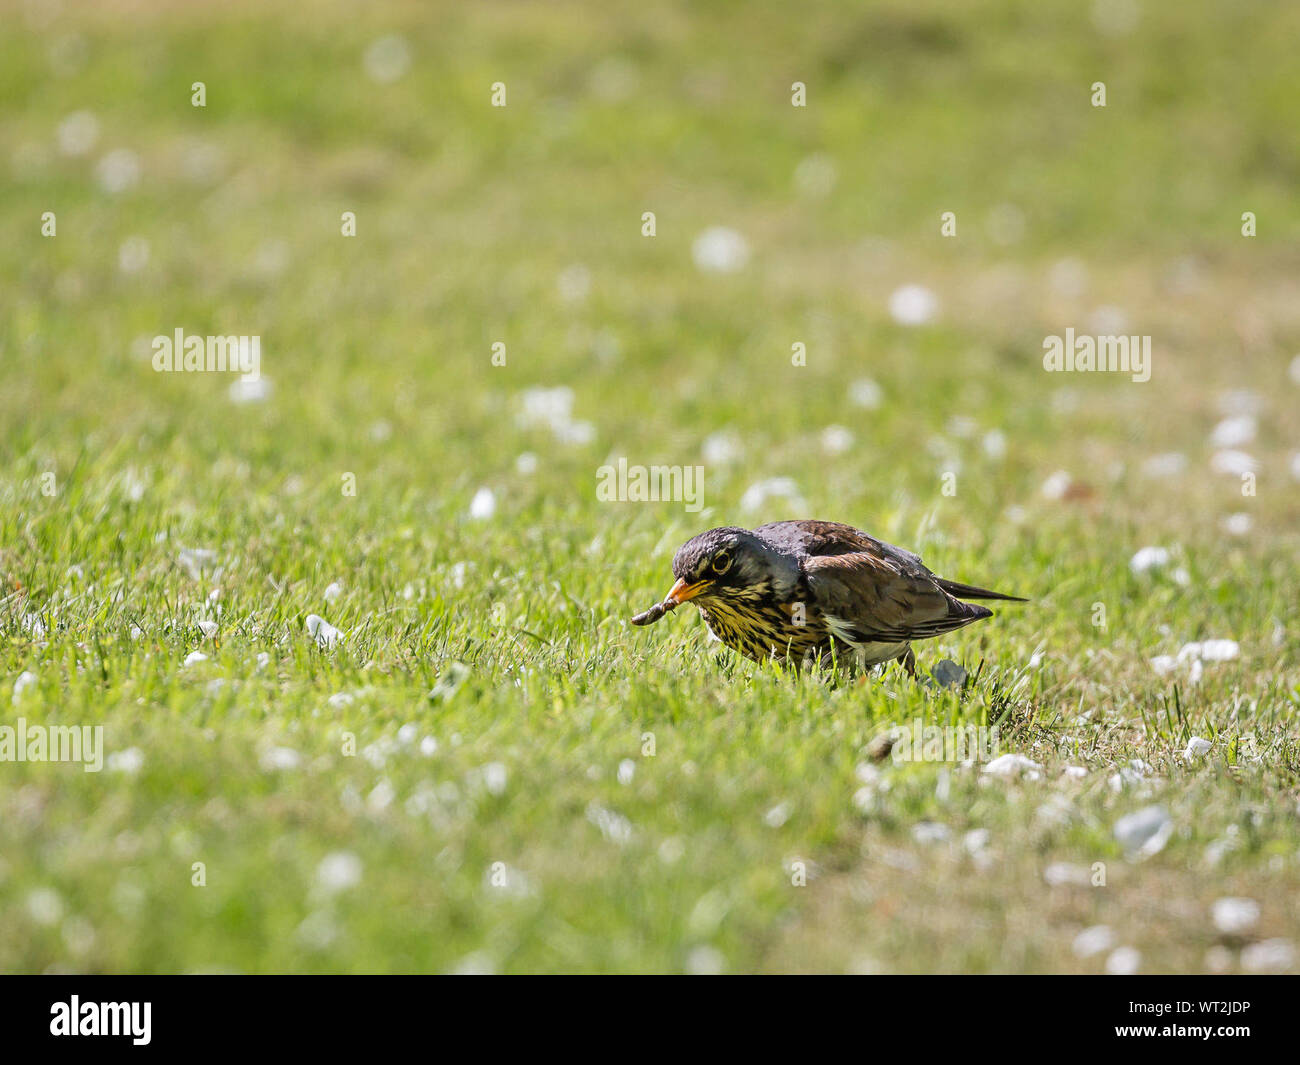 Close-up Of Bird Eating Insect Stock Photo